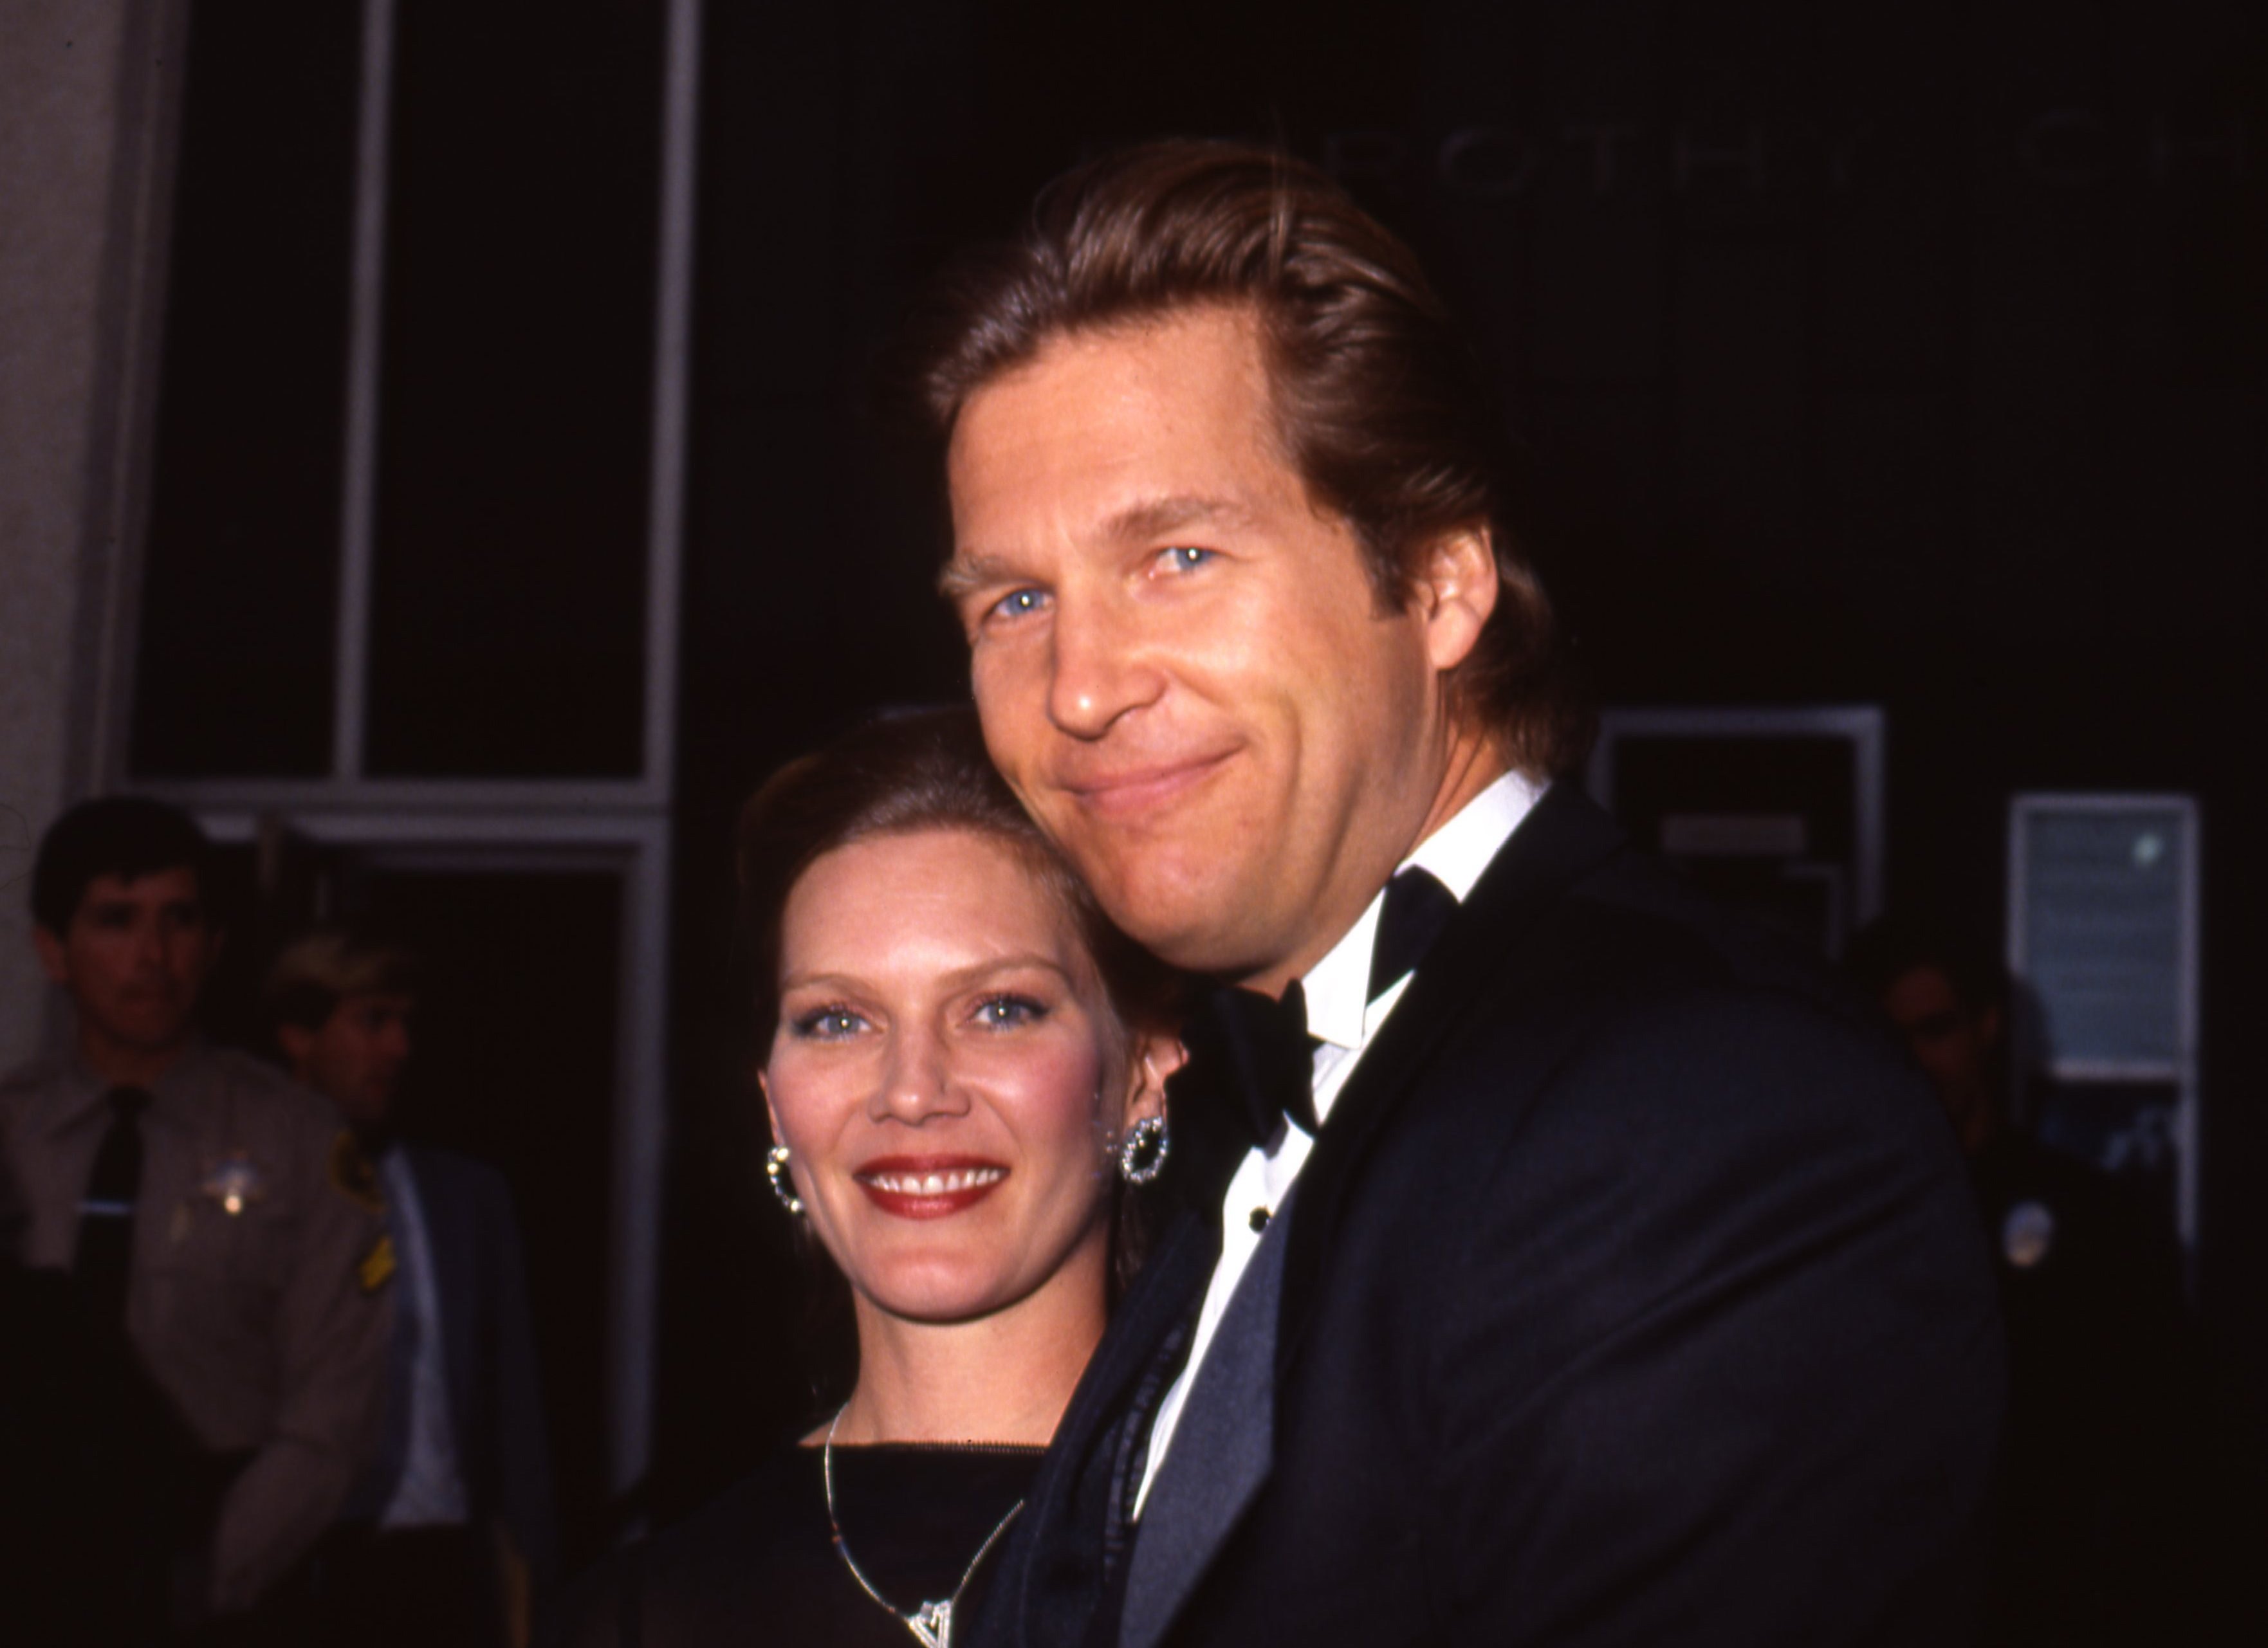 Susan and Jeff Bridges pose for a portrait at the Academy Awards in March 1987, in Los Angeles, California. | Source: Getty Images